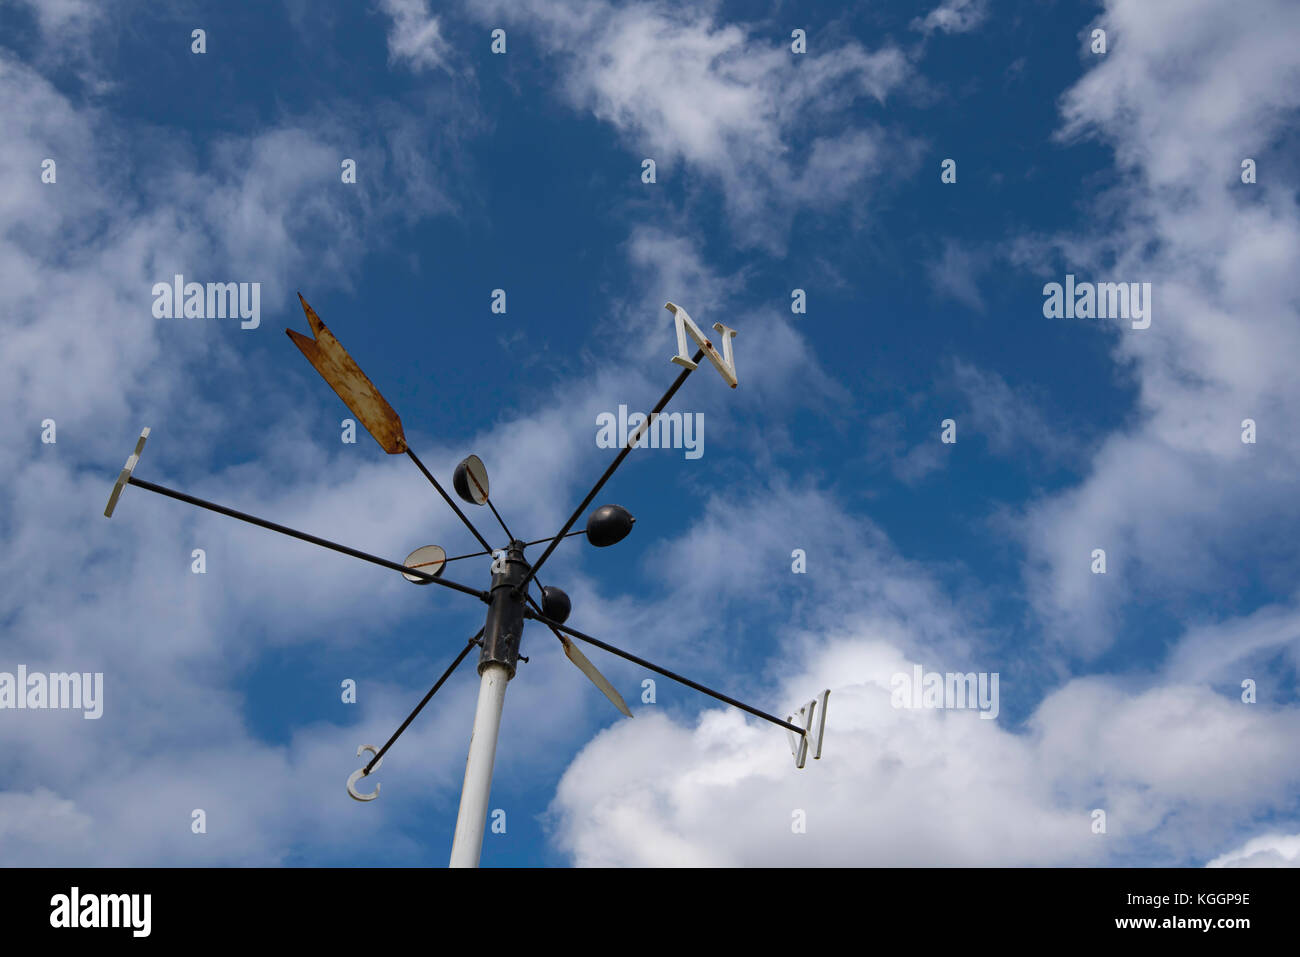 Looking up at an old weather vane or wind vane with a cloudy blue sky background Stock Photo